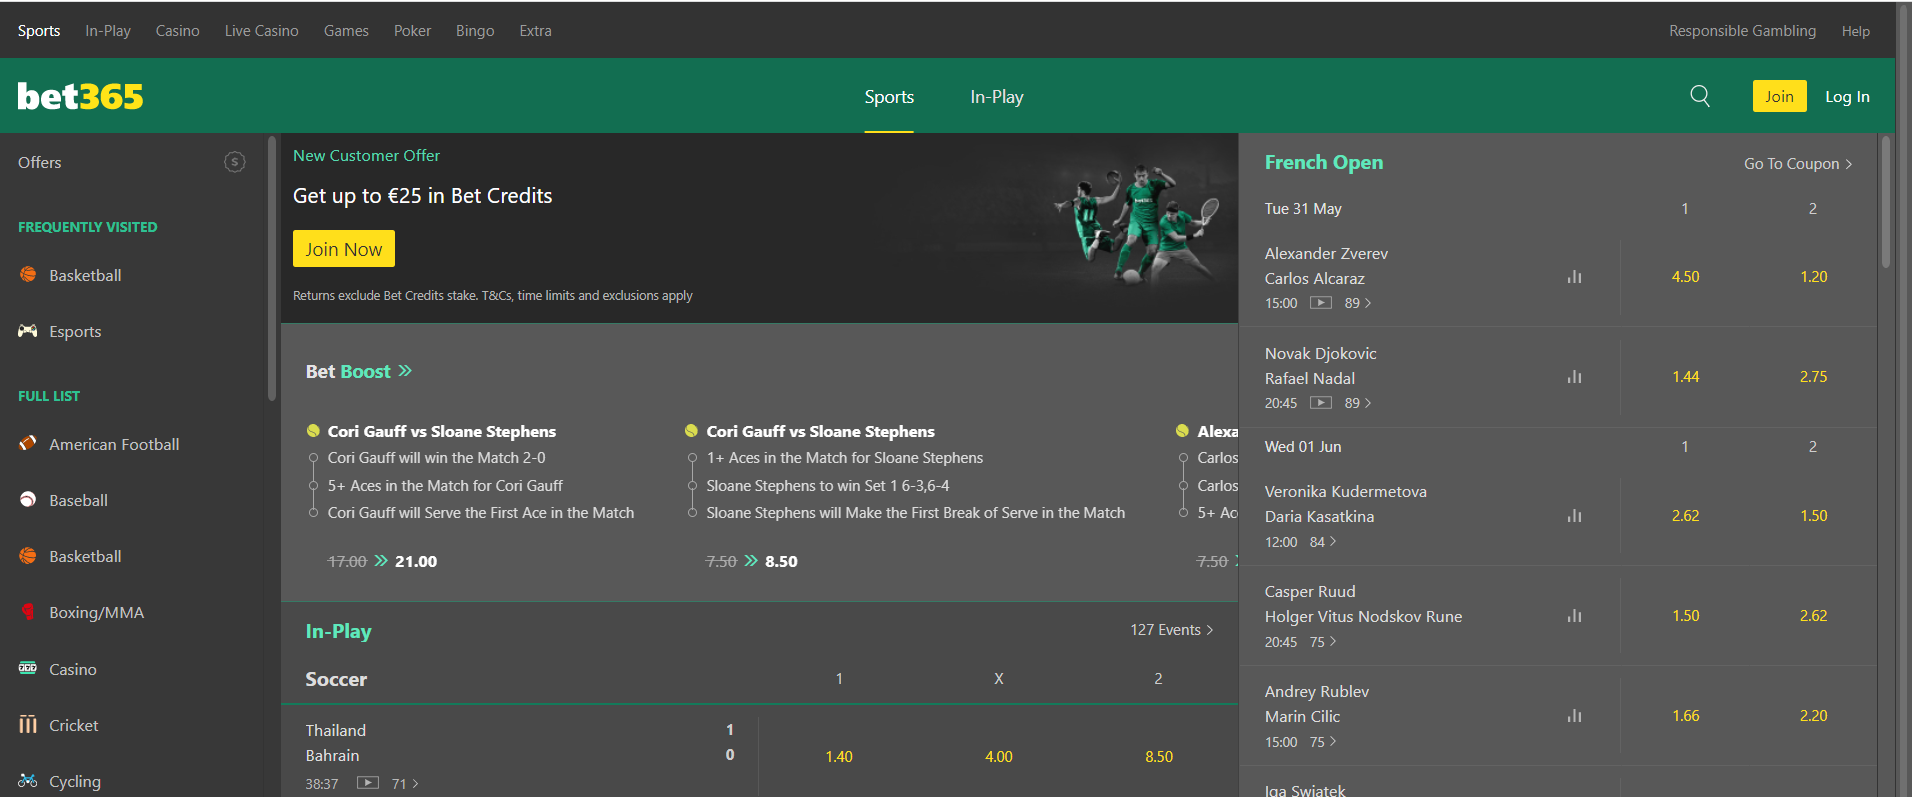 Bet365 Review - Image 1